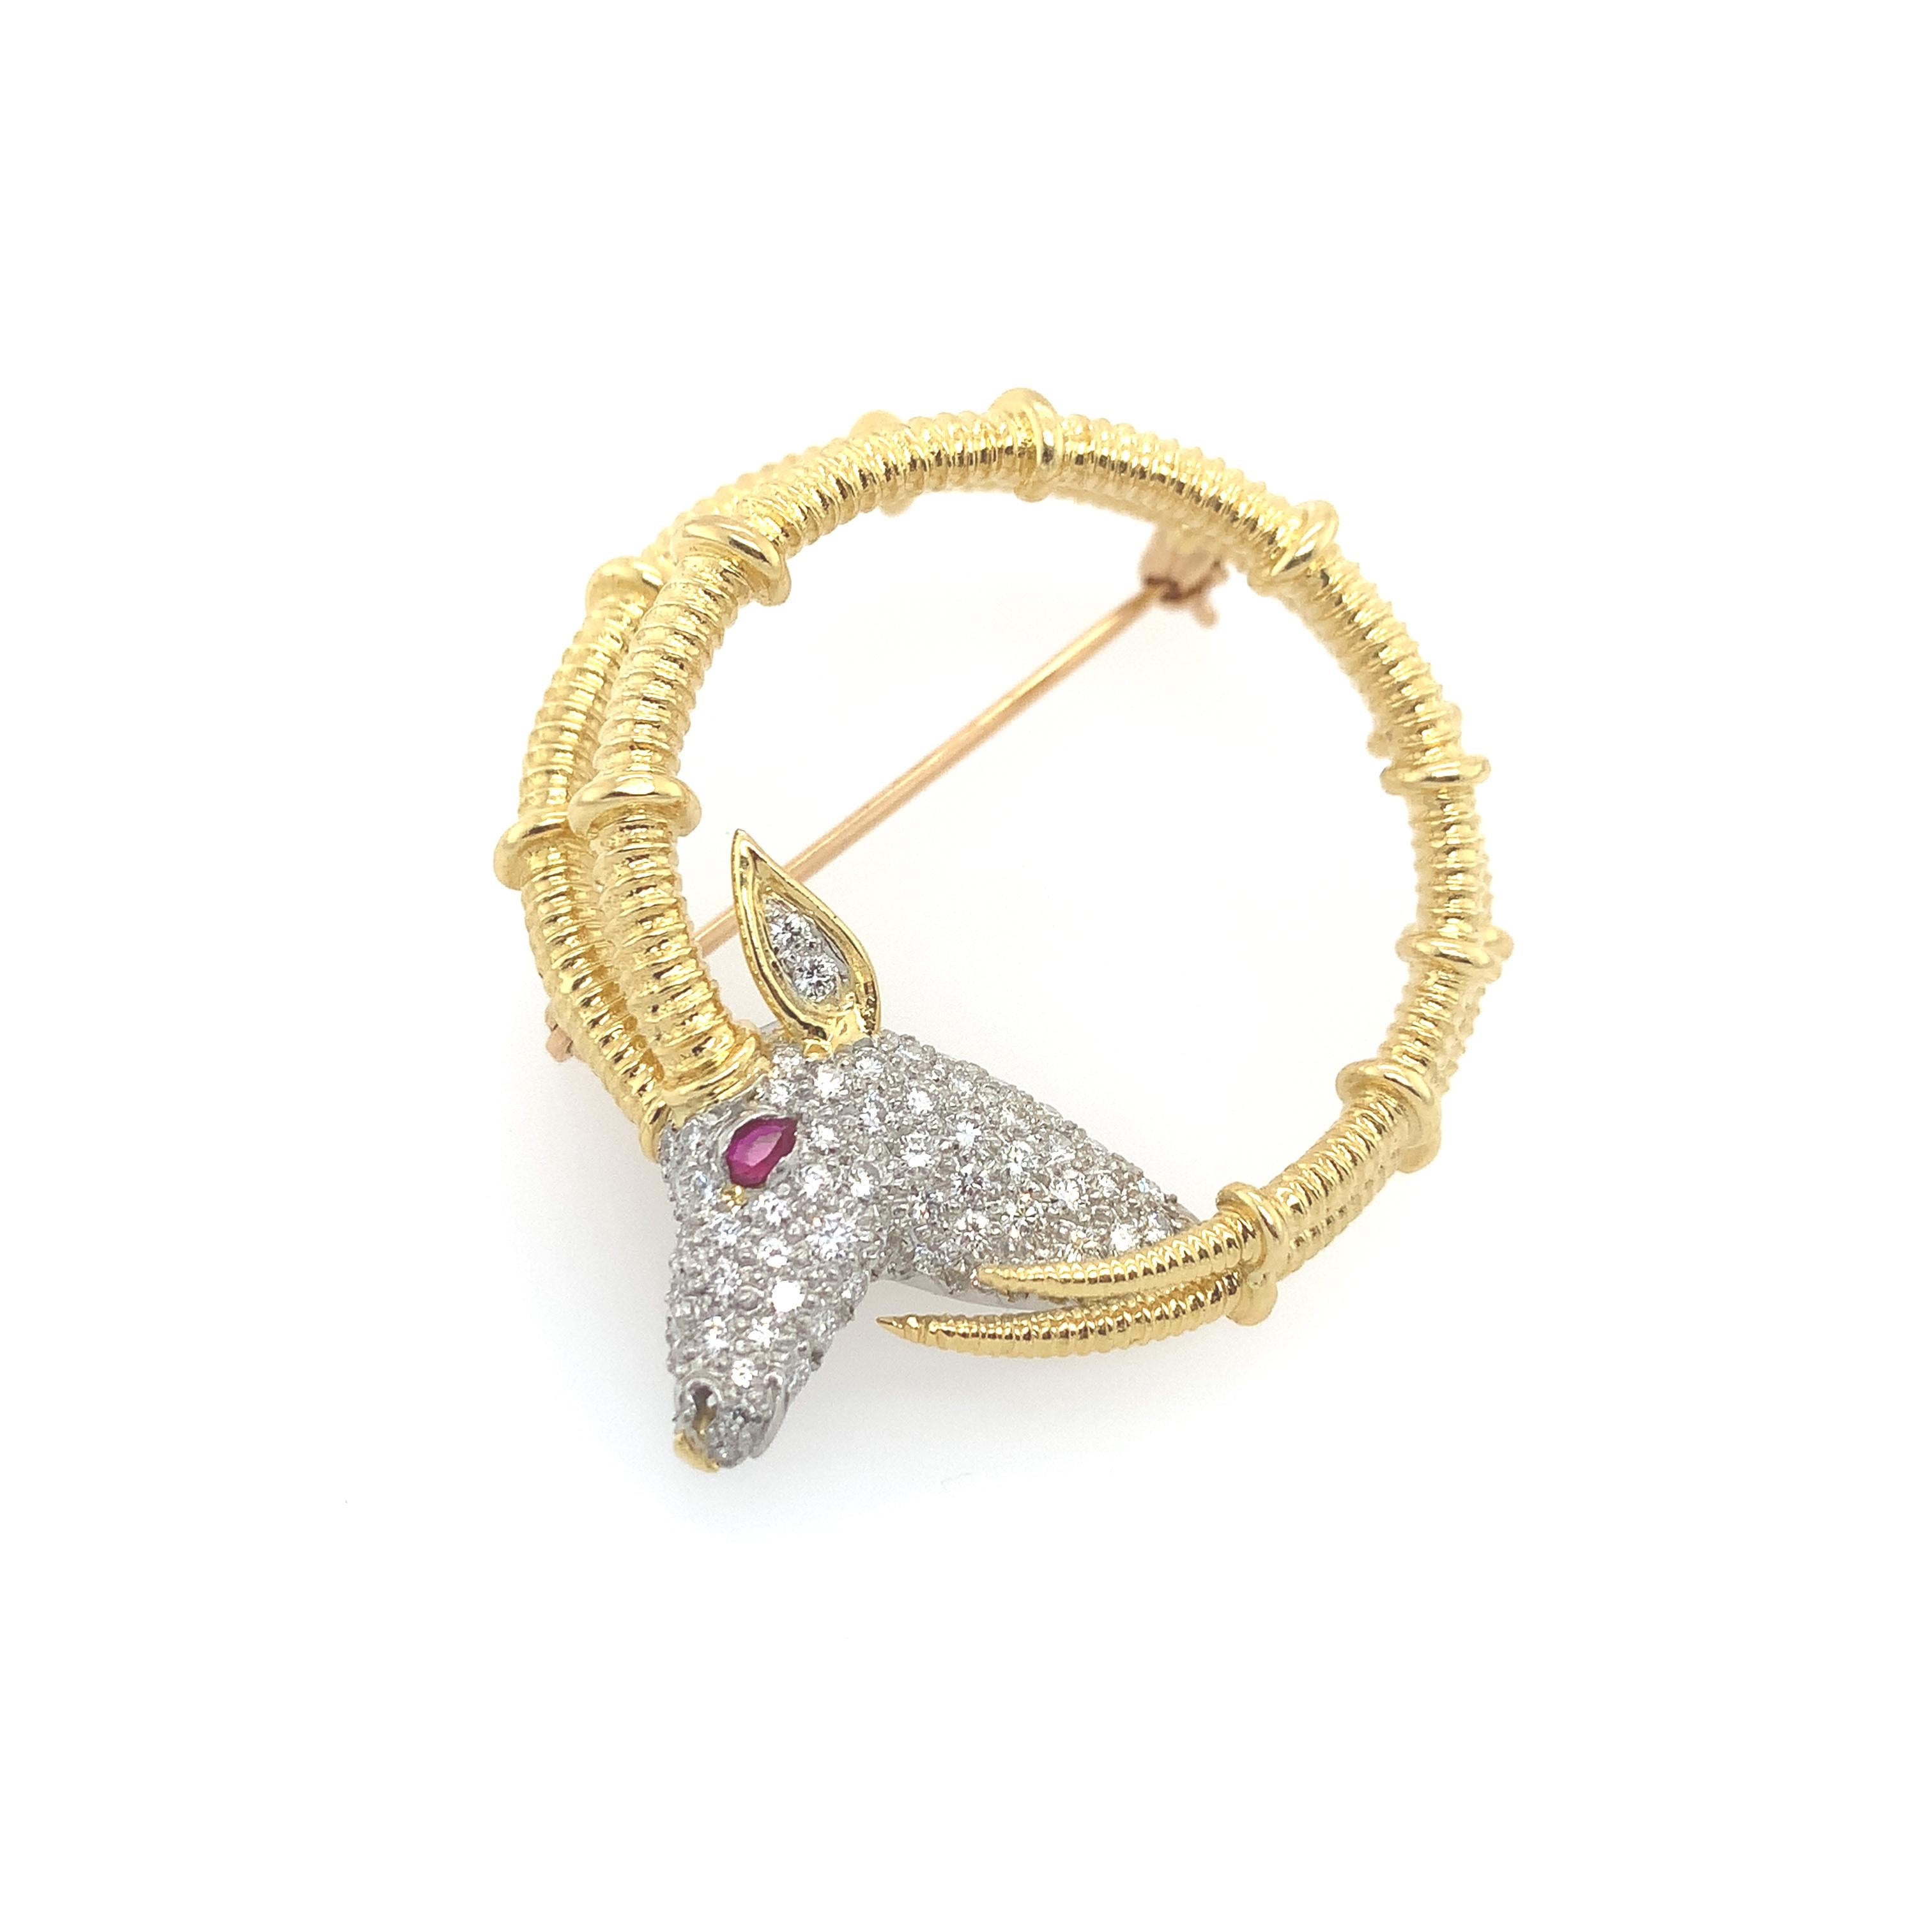 Iconic Ibex ram head pin designed by Jean Schlumberger for Tiffany & Co. Inspired by the majestic beauty of the natural world, this 18K yellow gold and platinum brooch is set with an estimated .87 carats of round brilliant-cut diamonds. Adorned with